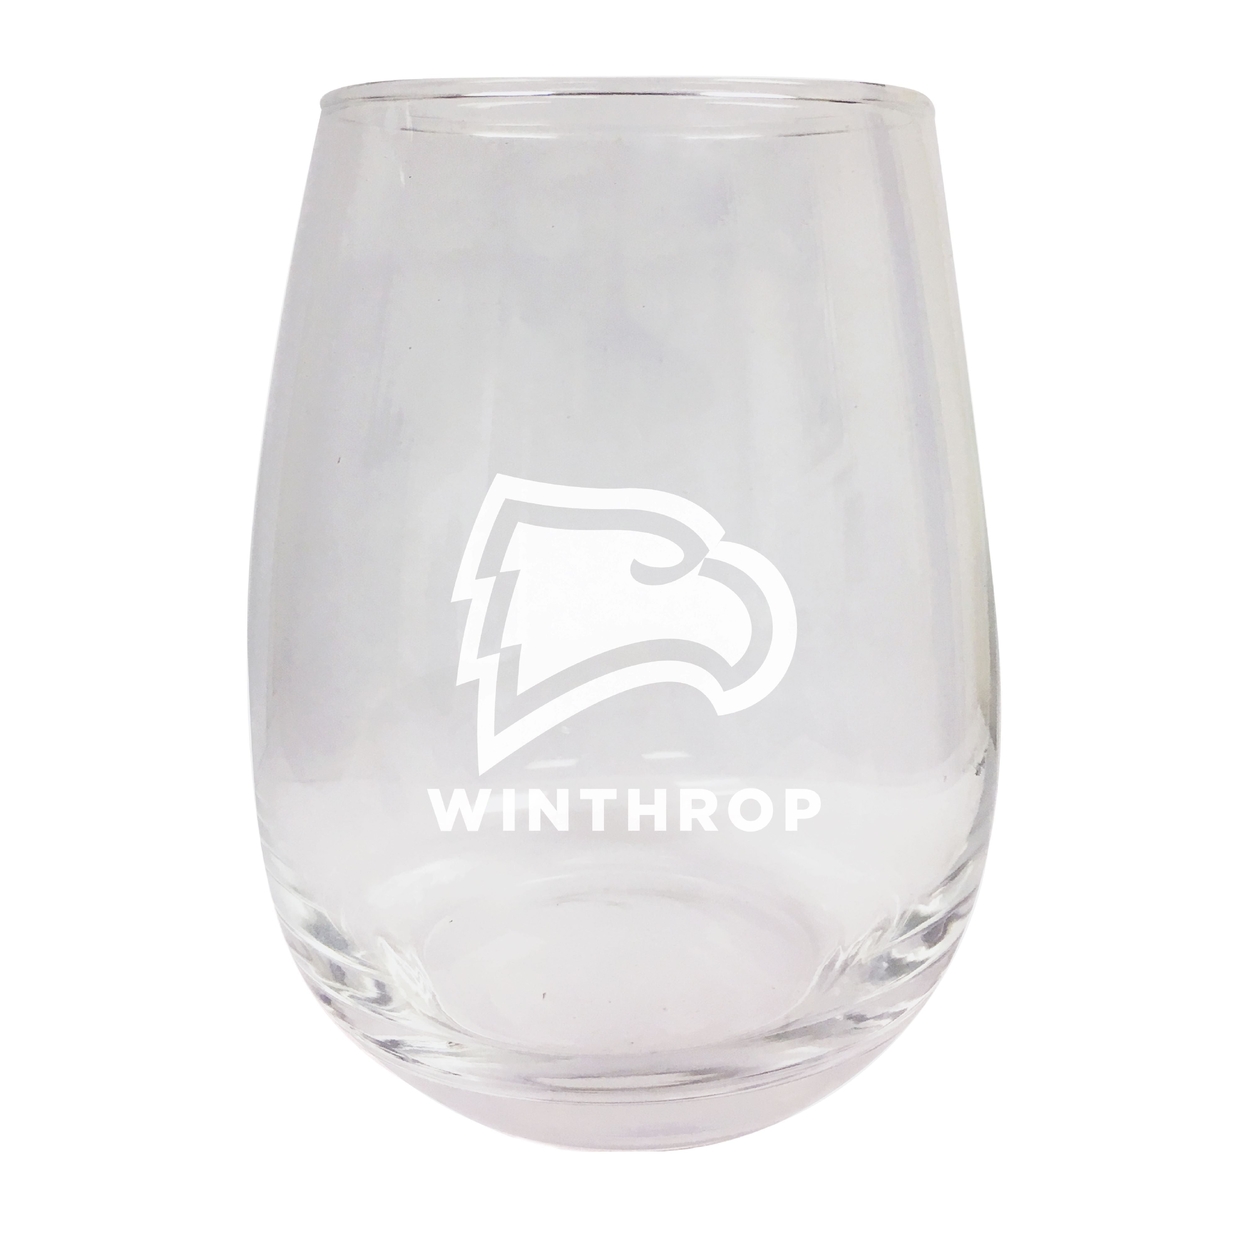 Winthrop University Etched Stemless Wine Glass